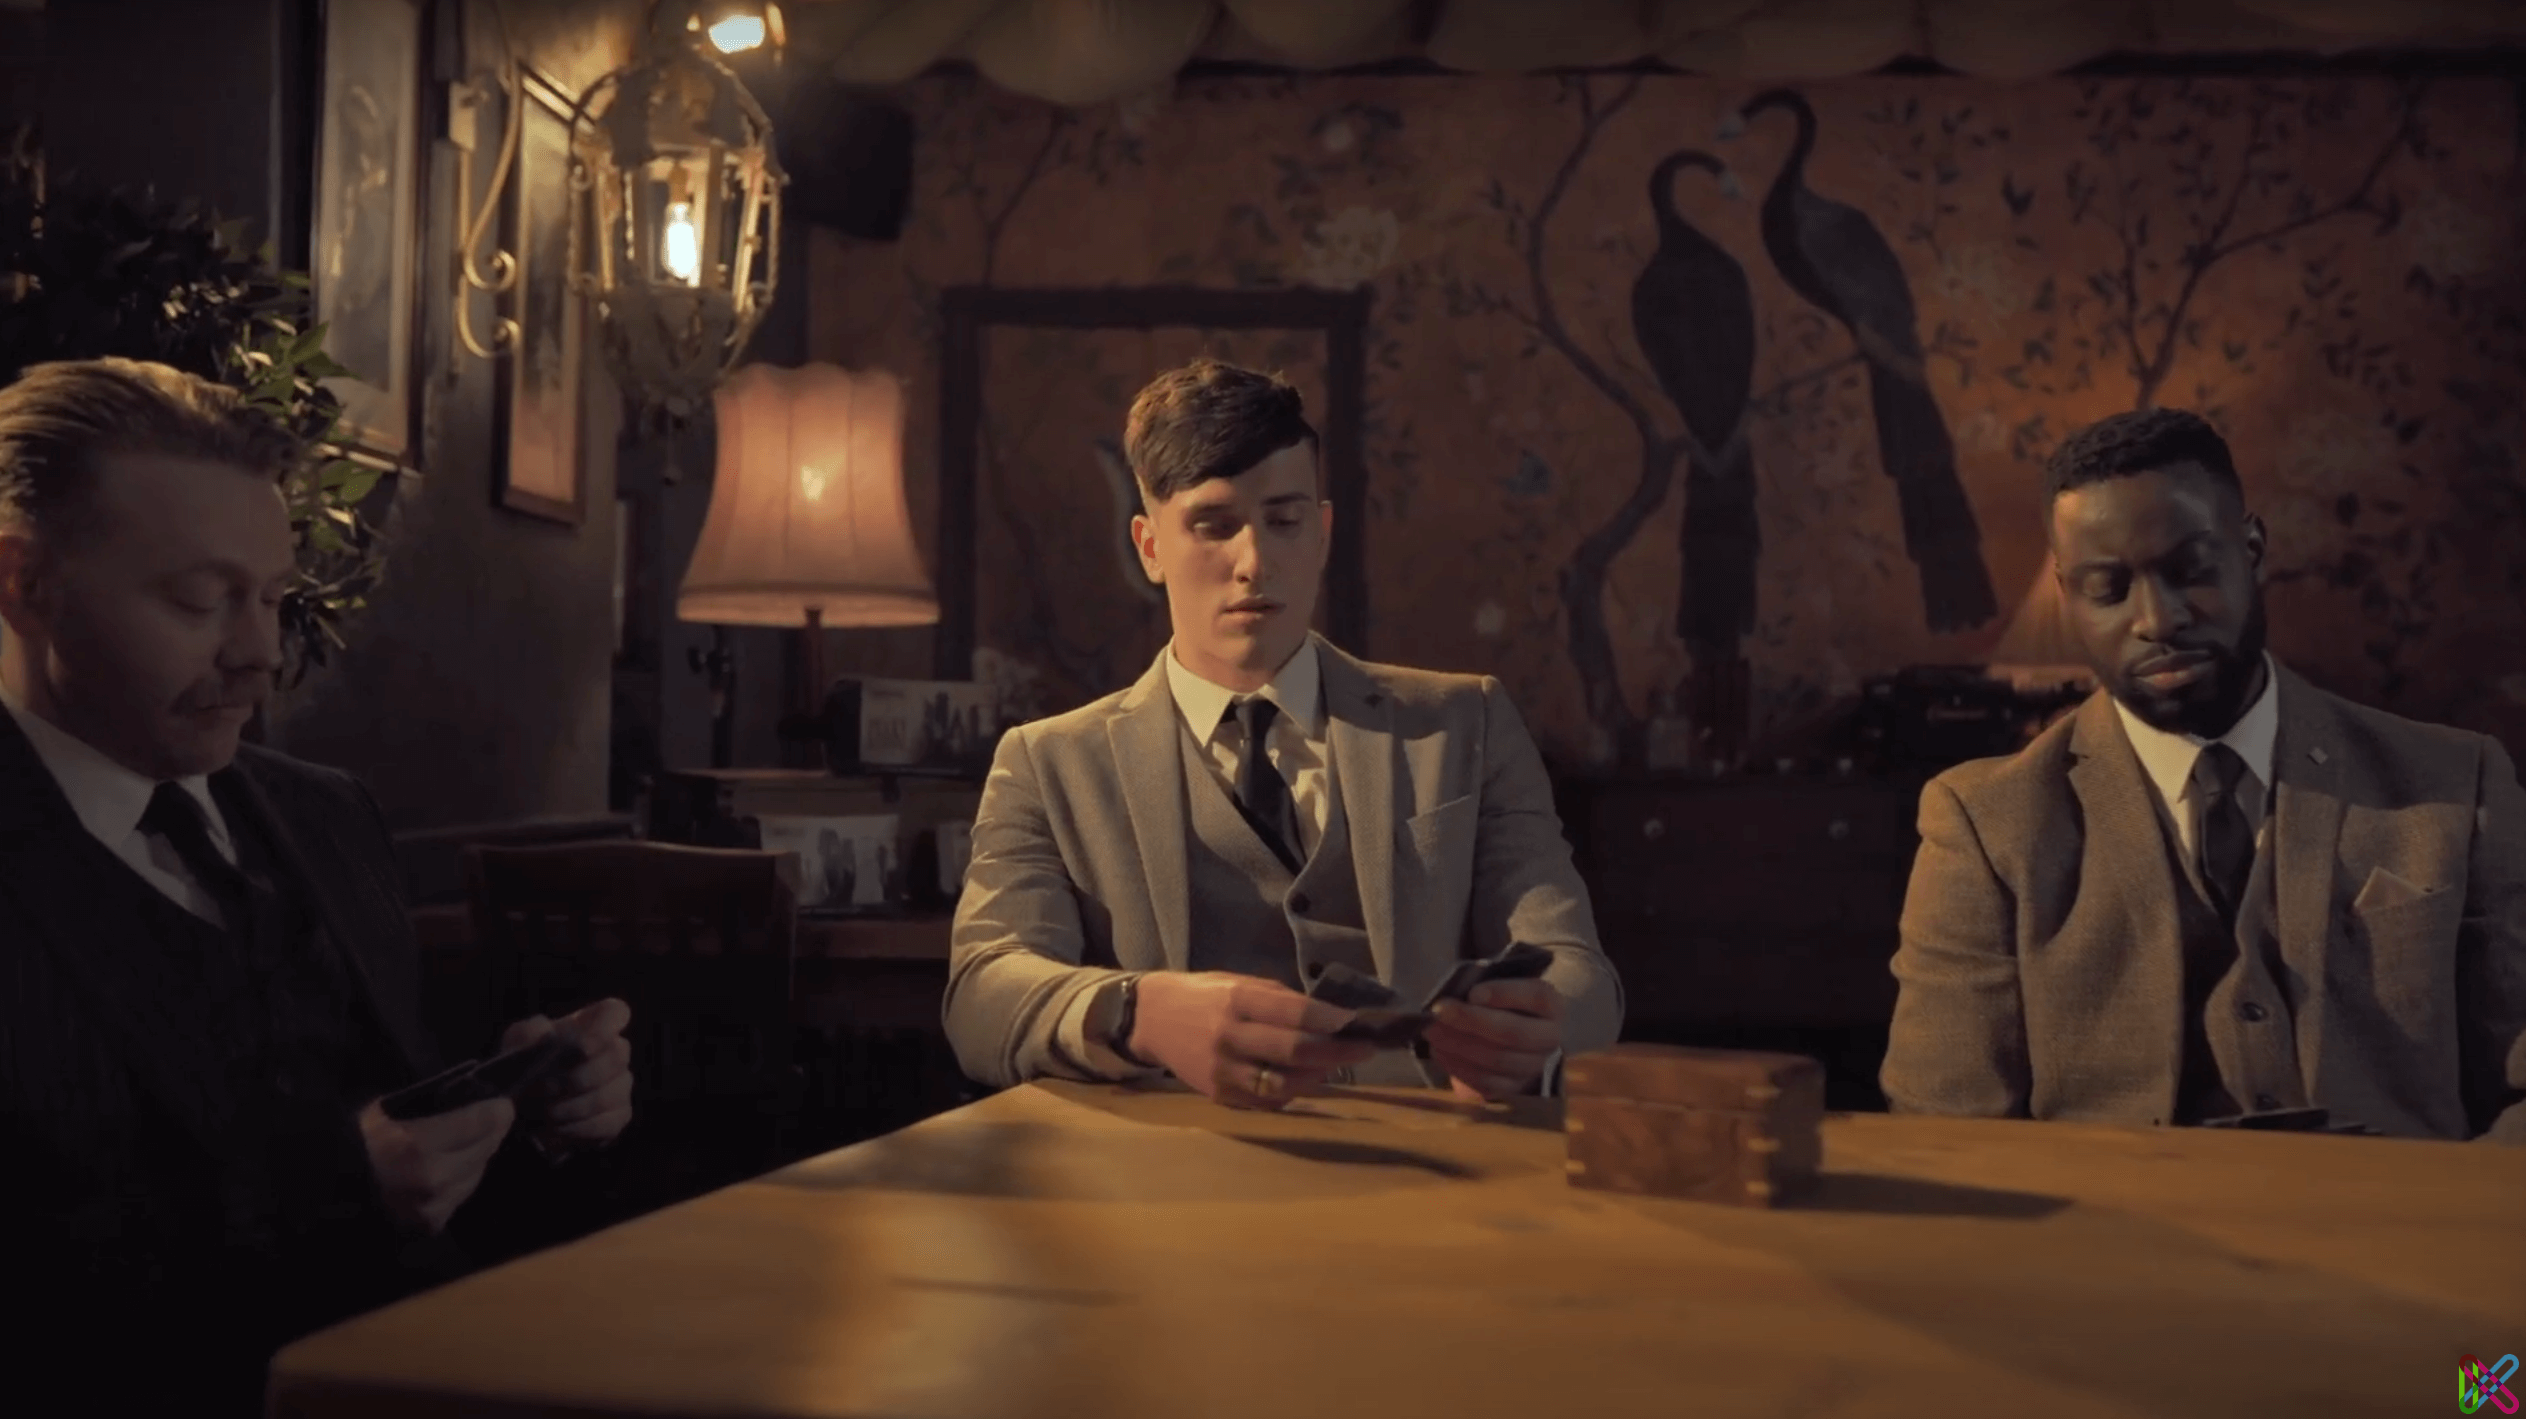 Three men in vintage suits sit at a table in a dimly lit room with a painted wall mural and vintage decor, in the style of the TV series Peaky Blinders.